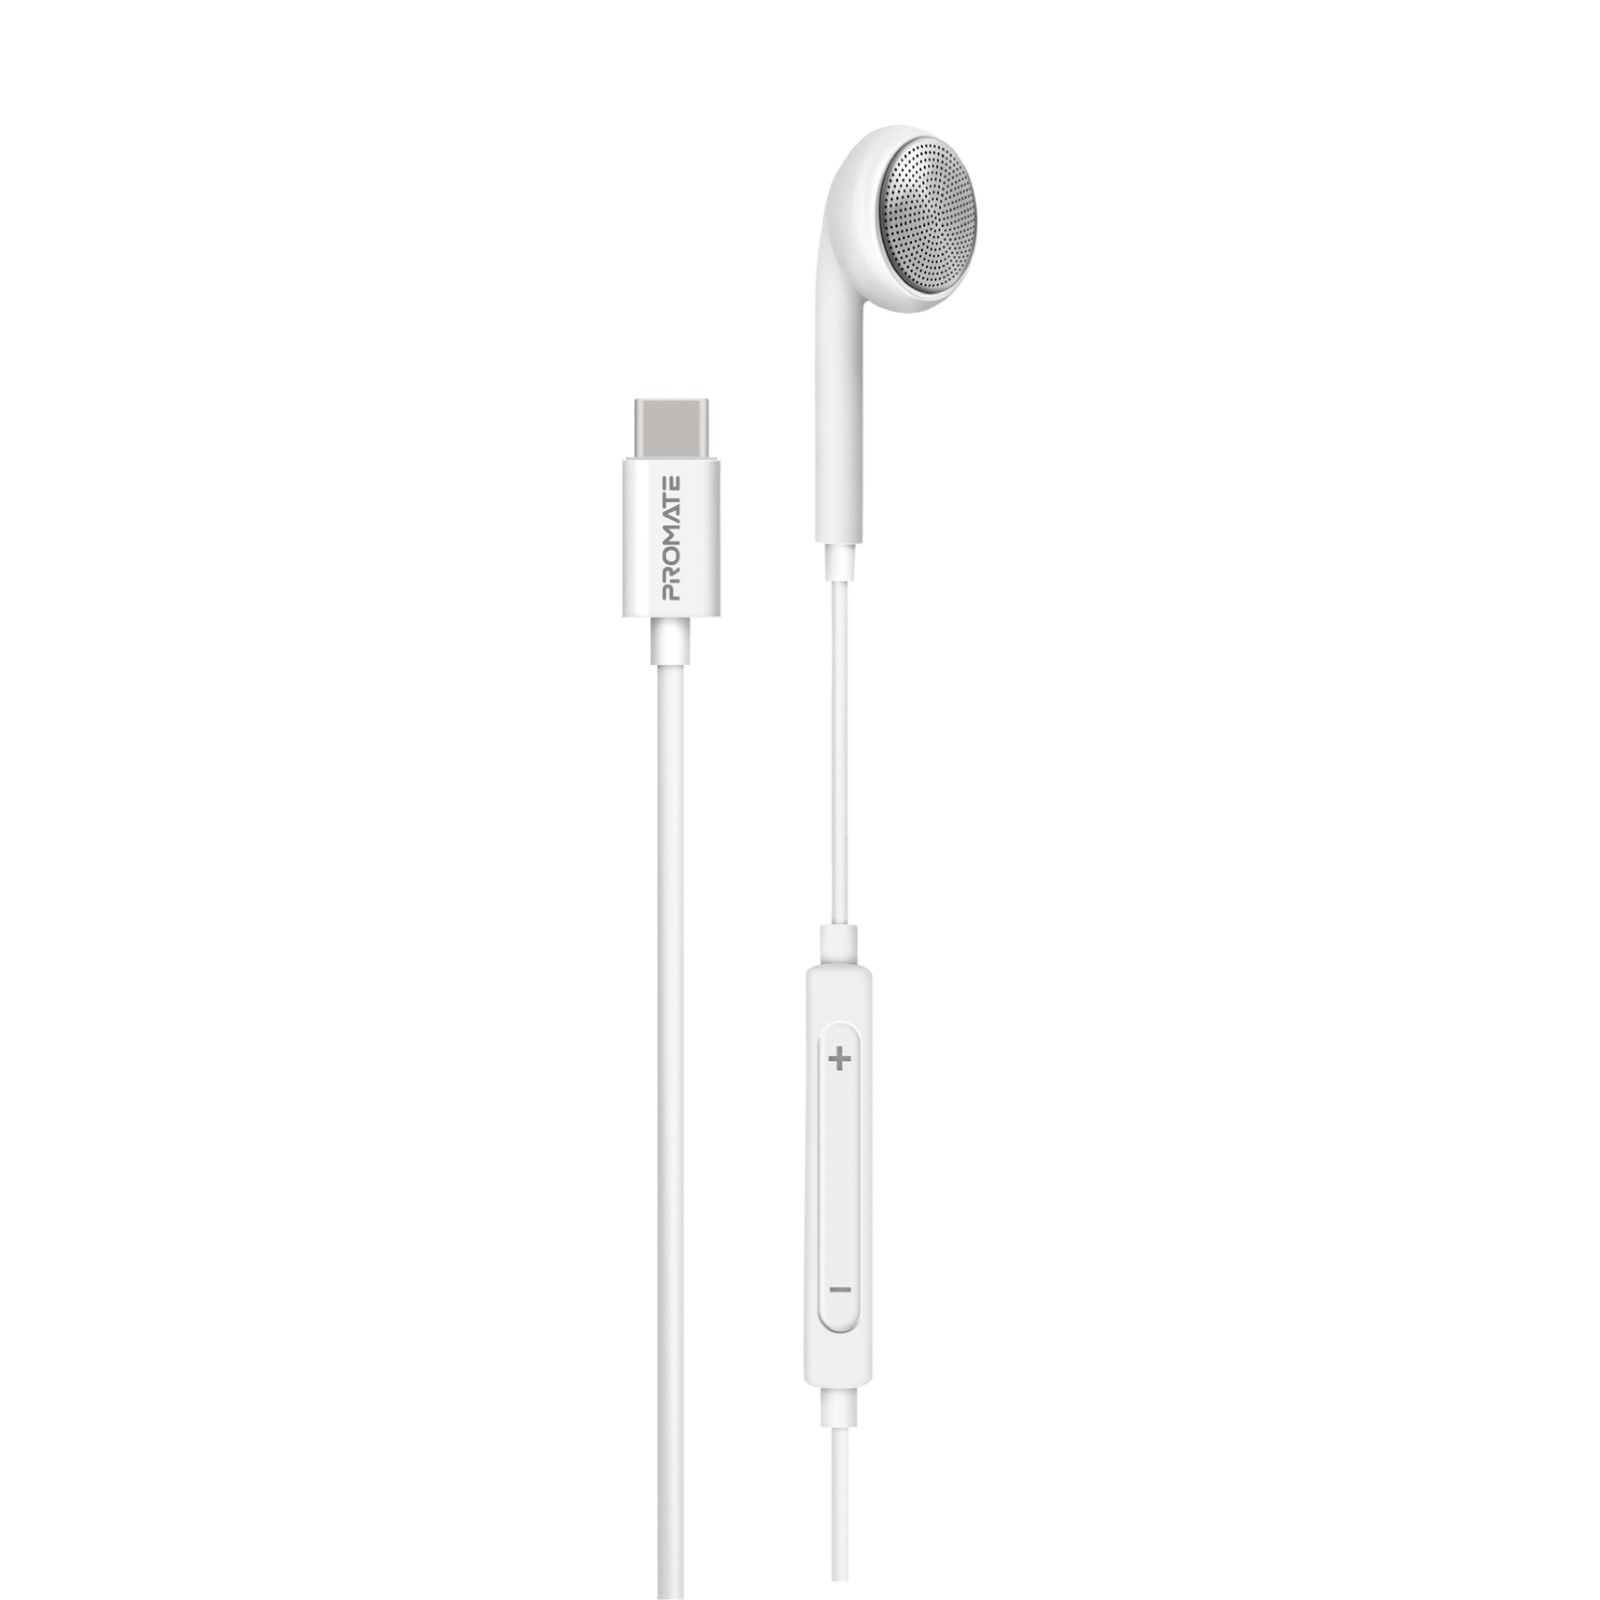 Слушалки ProMate LINGO-C,Ergonomic In-Ear USB-C Wired Mono Earphone • In-Line Microphone and Volume Controls • Comfort-Fit •  Works with ALL USB-C Mobiles and Tablets, Бял